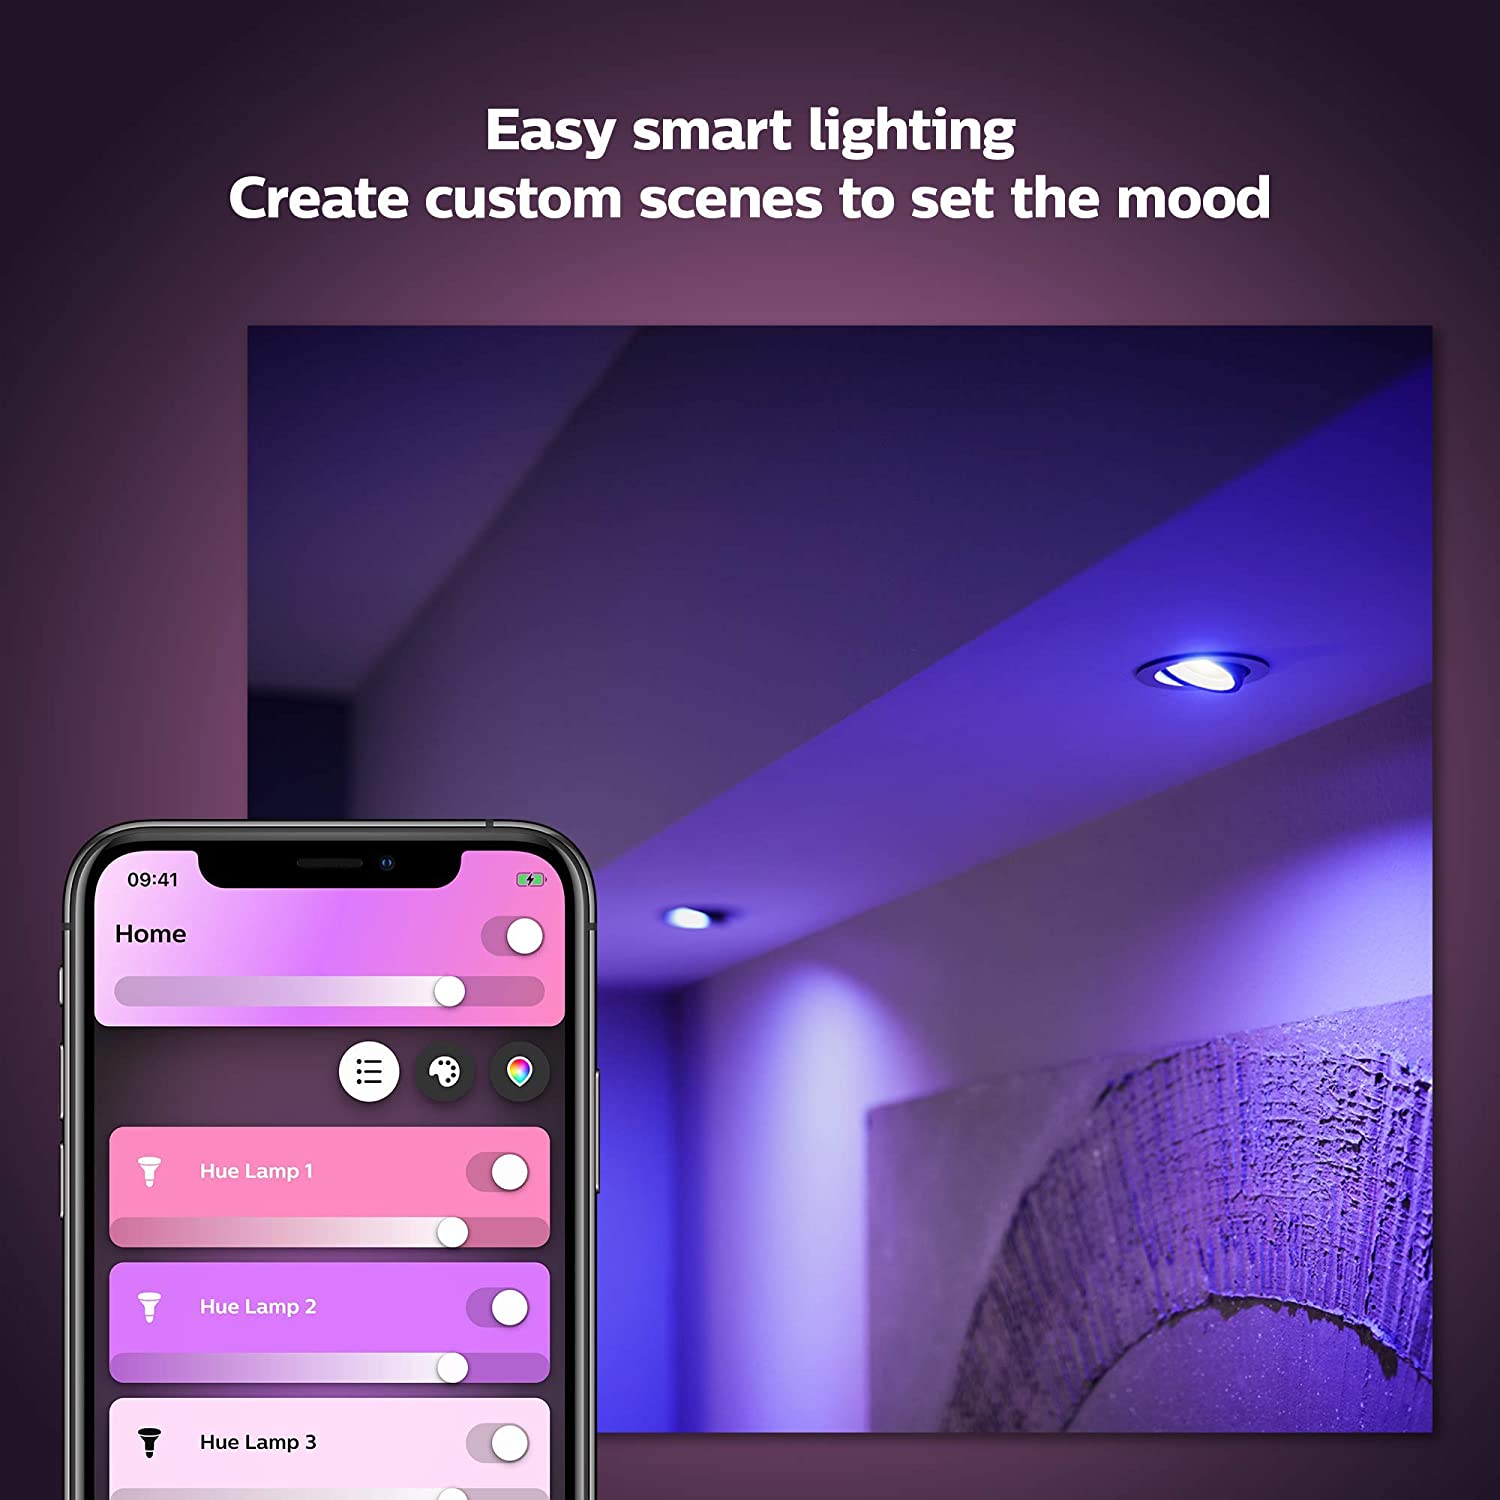 Philips Hue GU10 Smart Light Bulb White and Color Ambiance